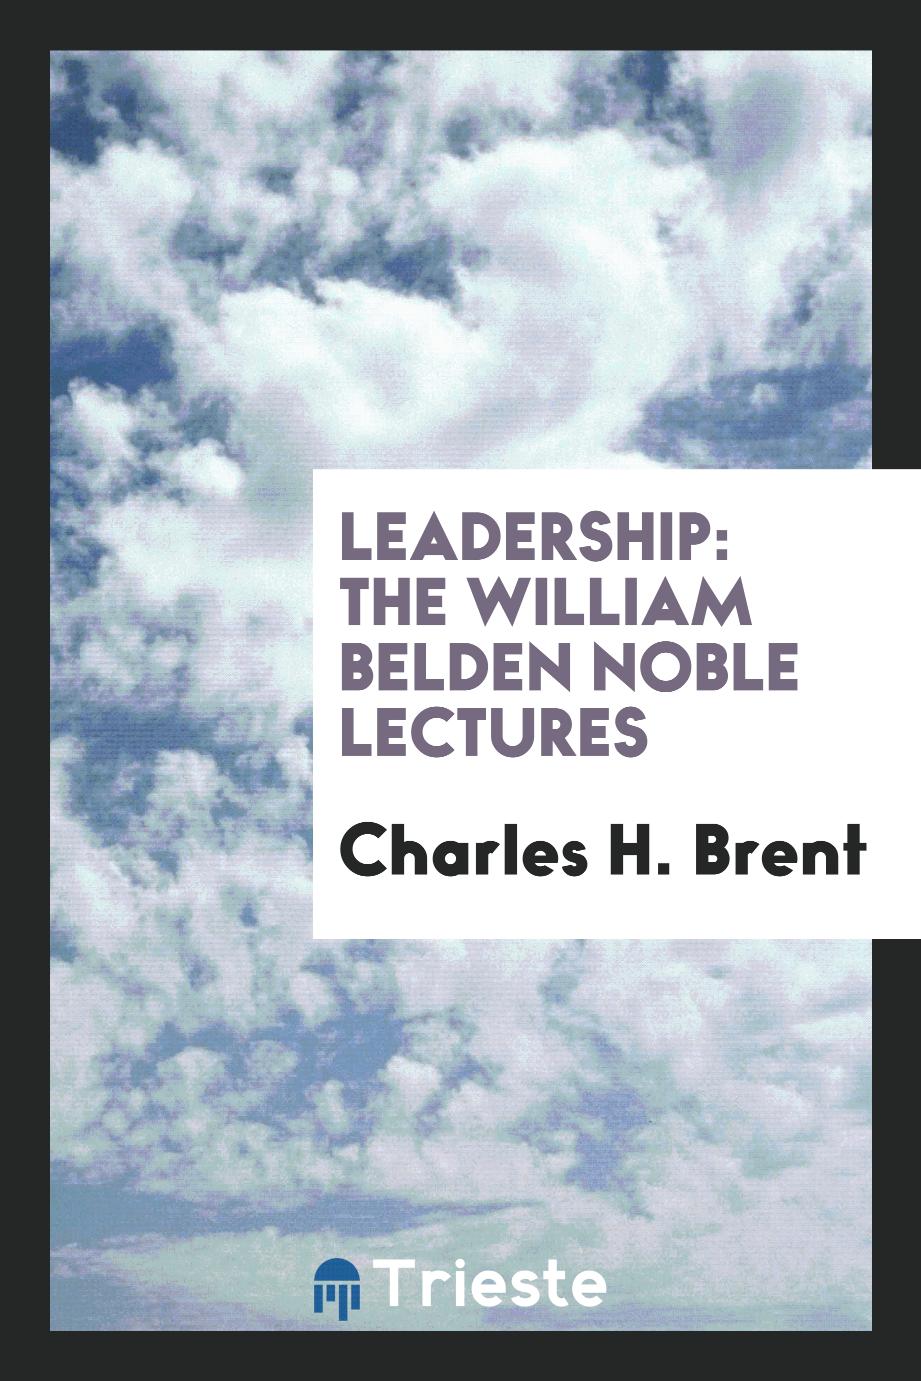 Leadership: the William Belden Noble lectures